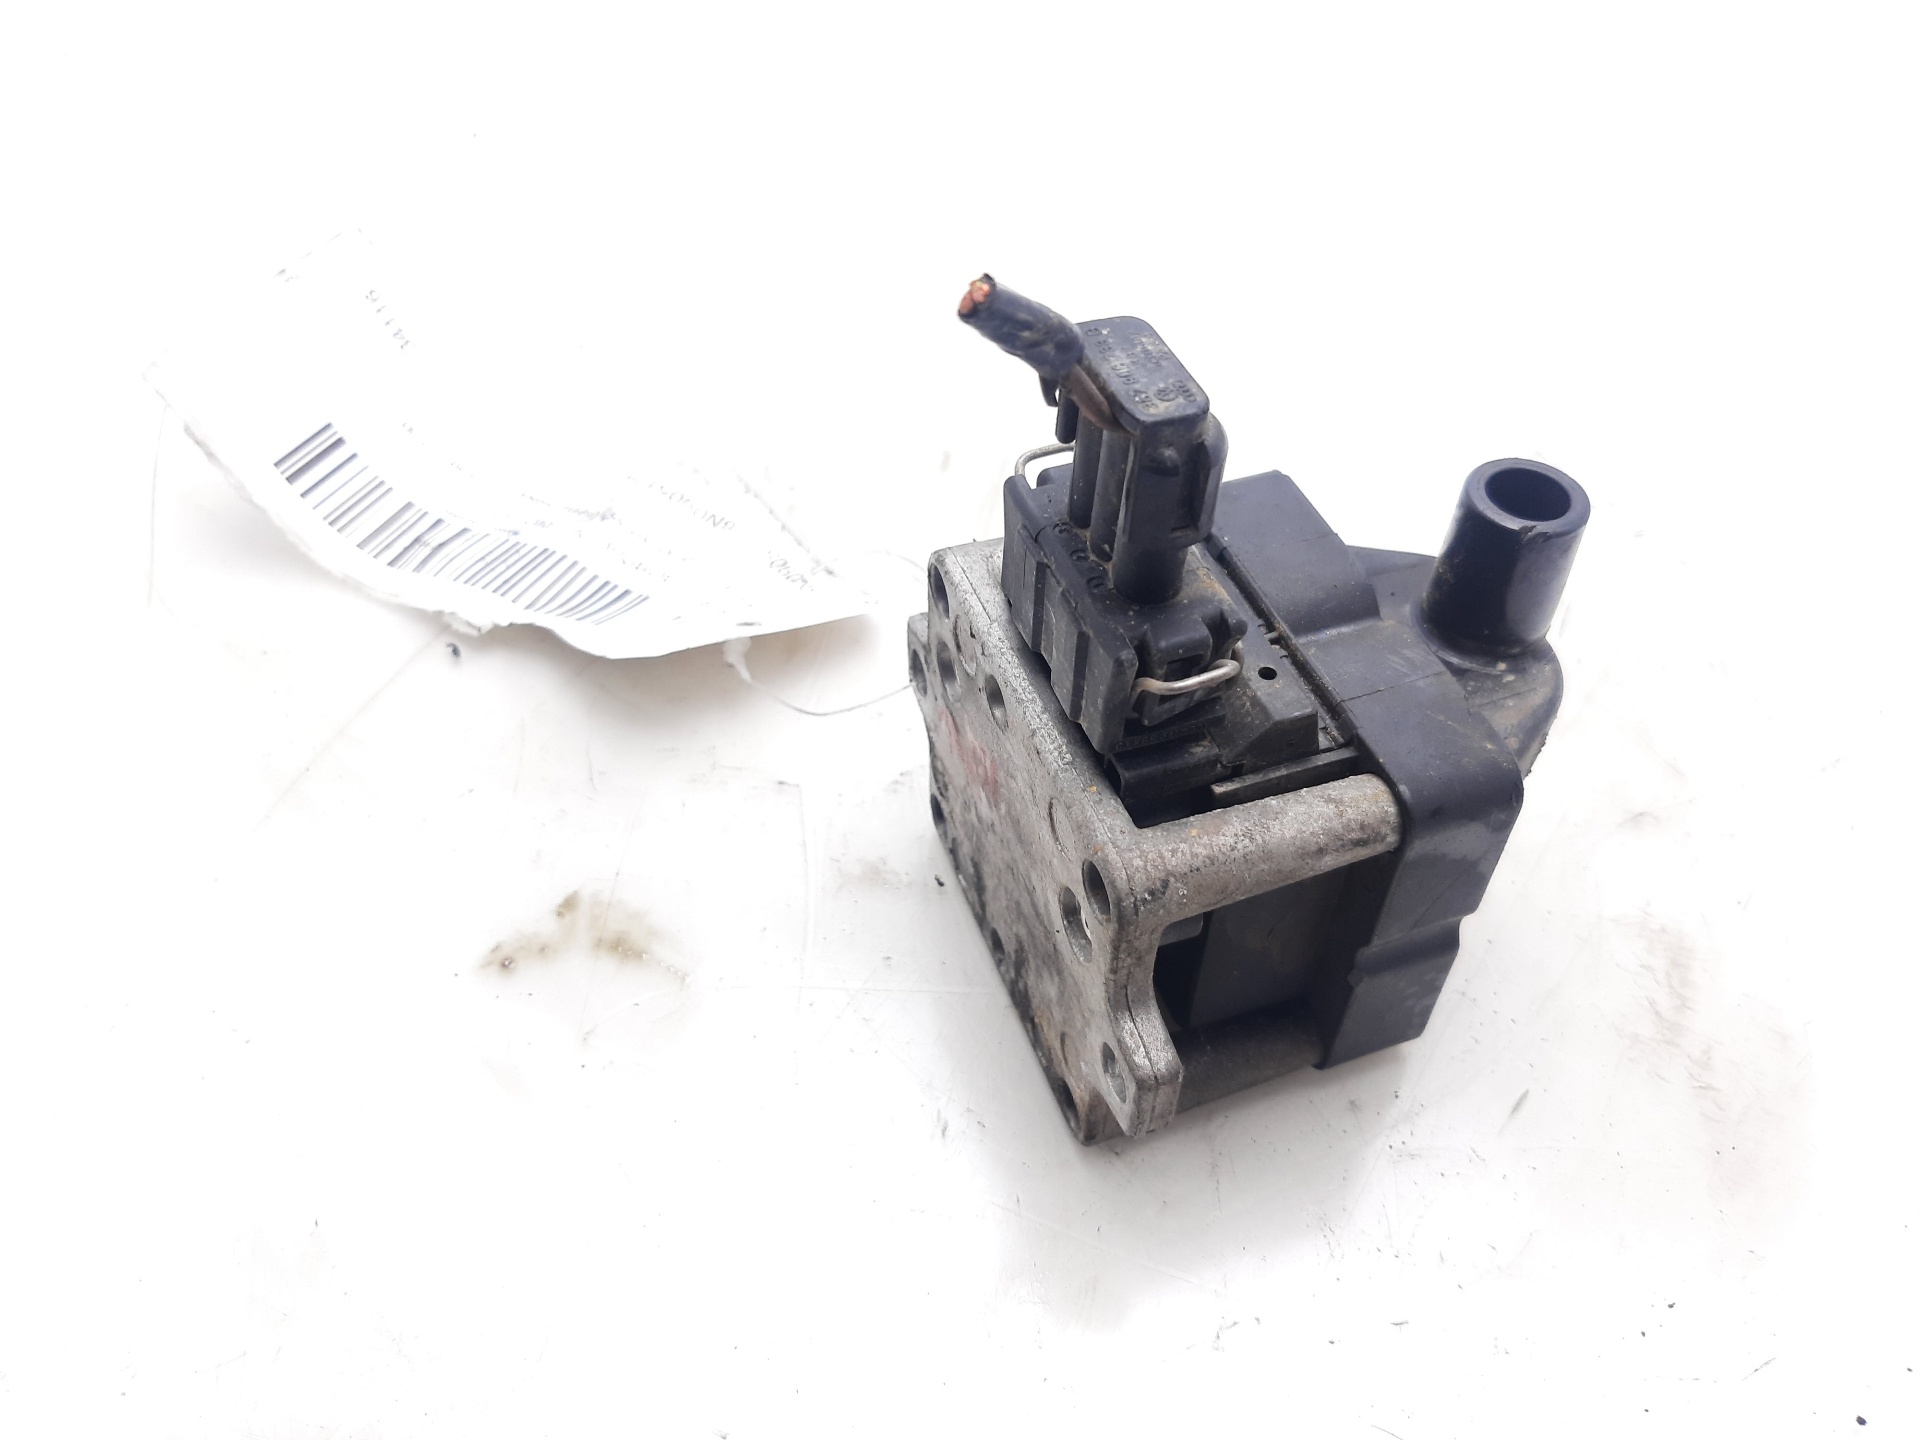 SEAT Arosa 6H (1997-2004) High Voltage Ignition Coil 6N0905104 23985360